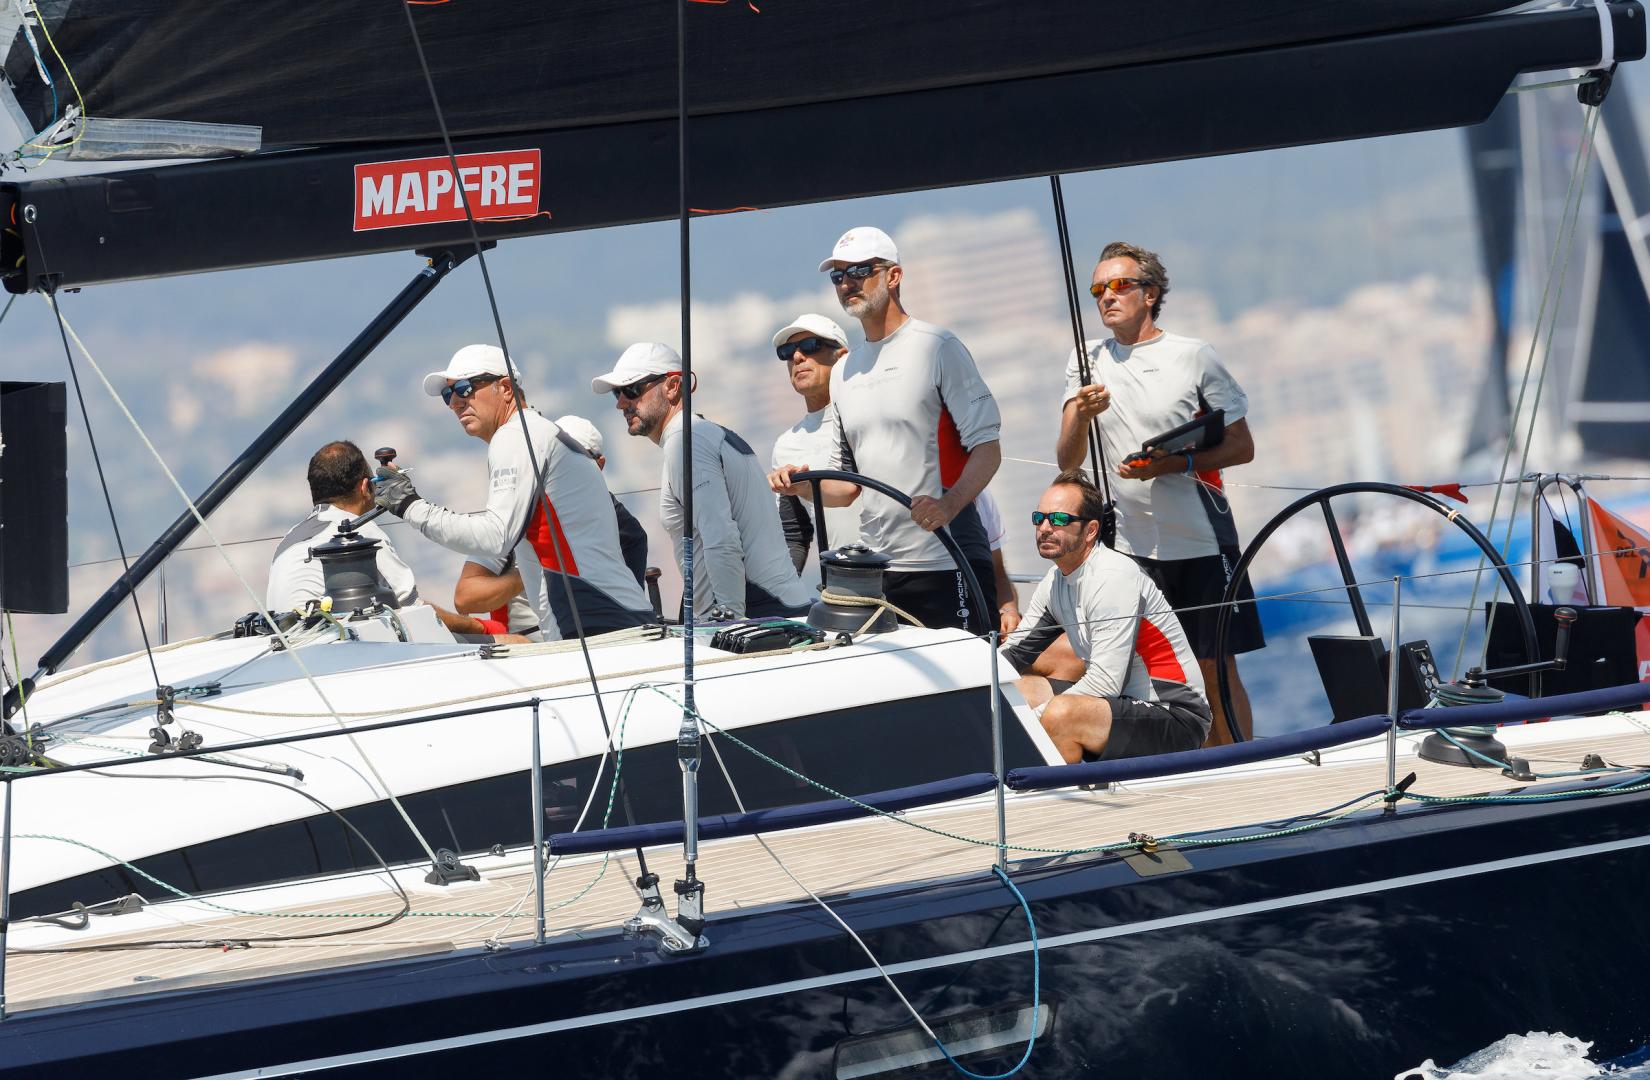 Aifos 500 with HM King Felipe VI of Spain at the helm